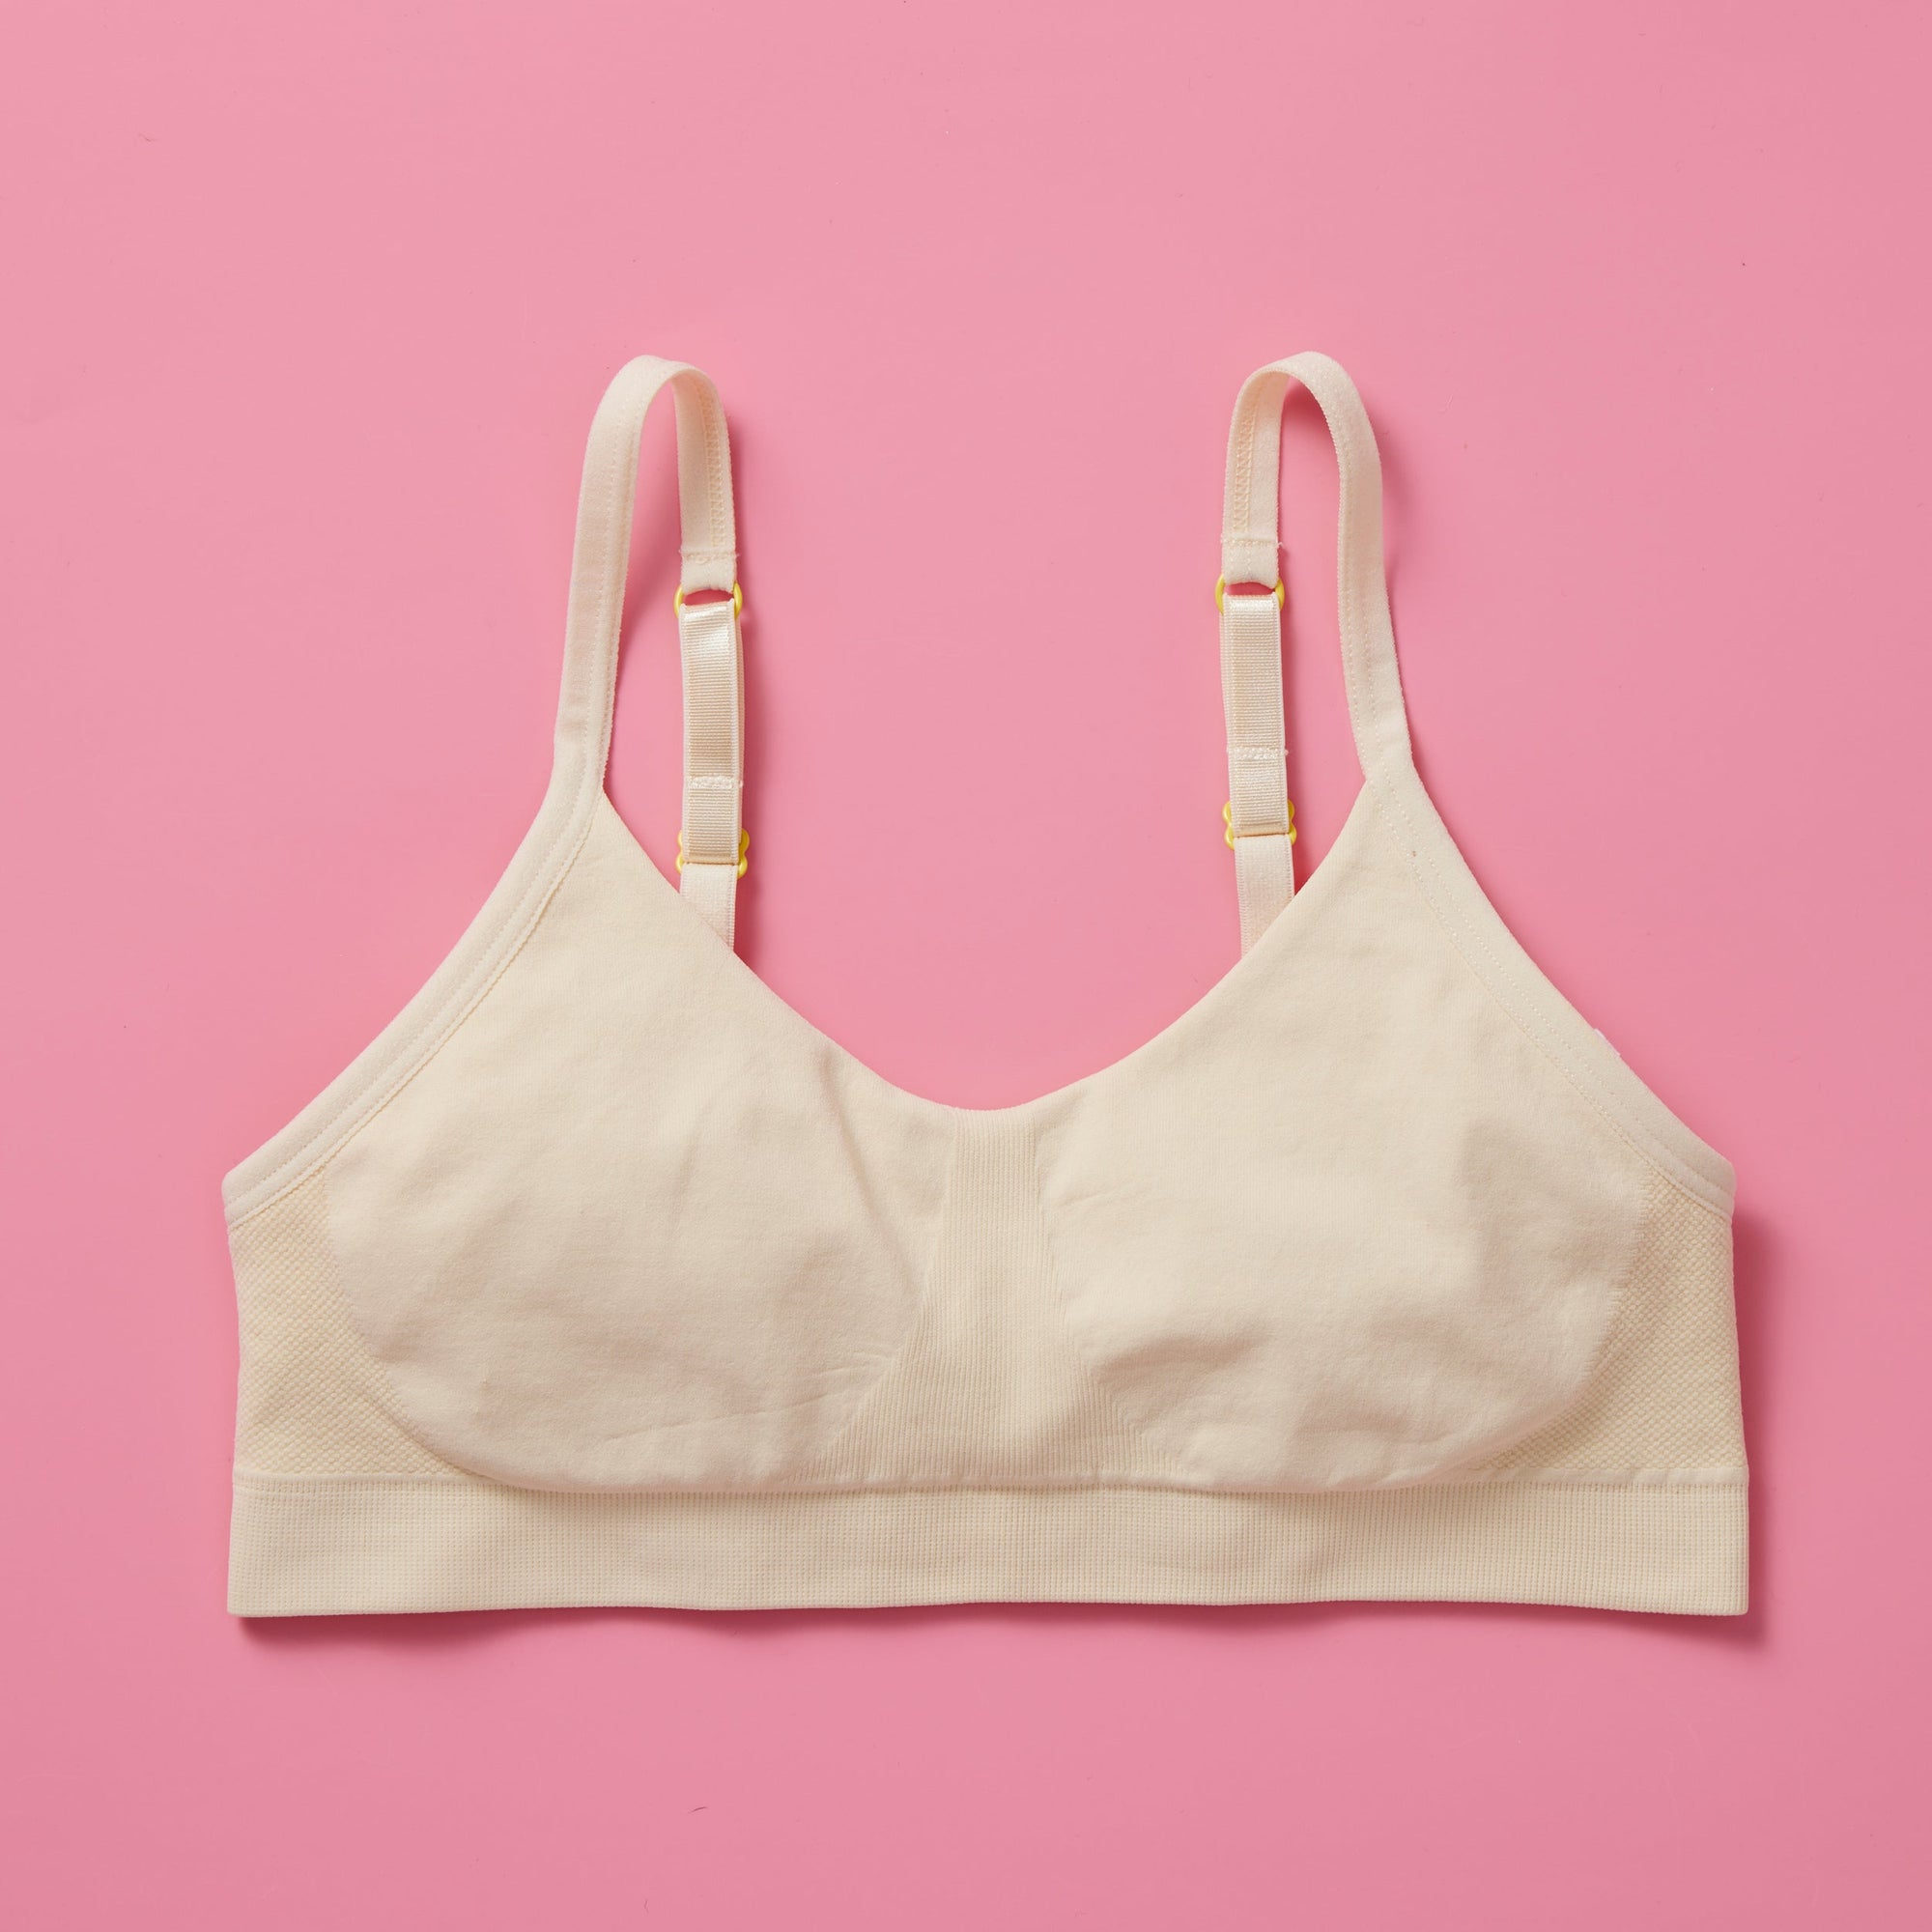 The Best First Bras For Girls. The Original By Girls For Girls Brand! -  Yellowberry